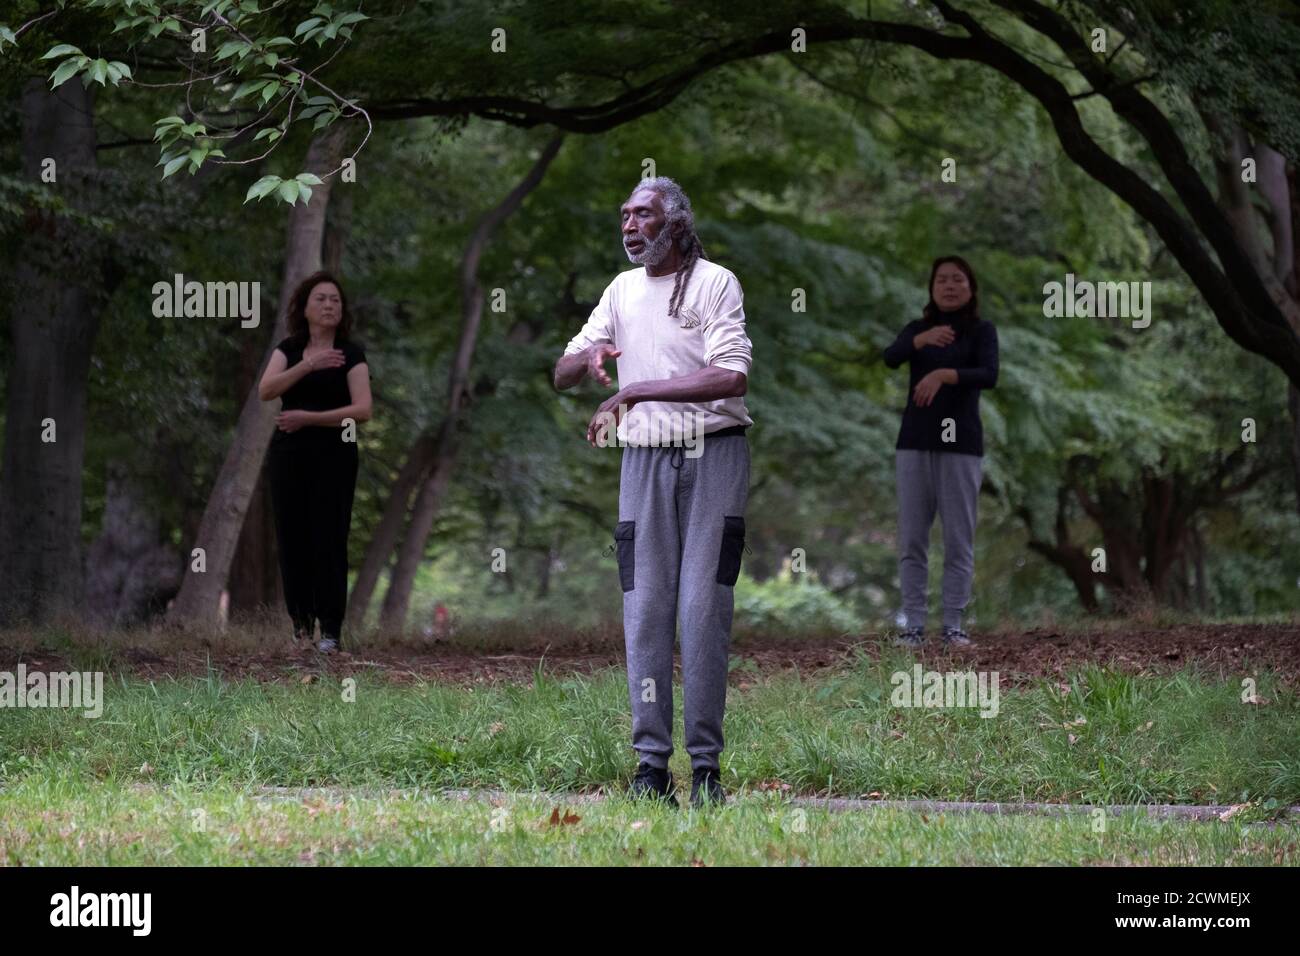 A slender older man with long hair leads an exercise class that's a combination of yoga, tai chi & stretching. In a park in Queens, New York City. Stock Photo